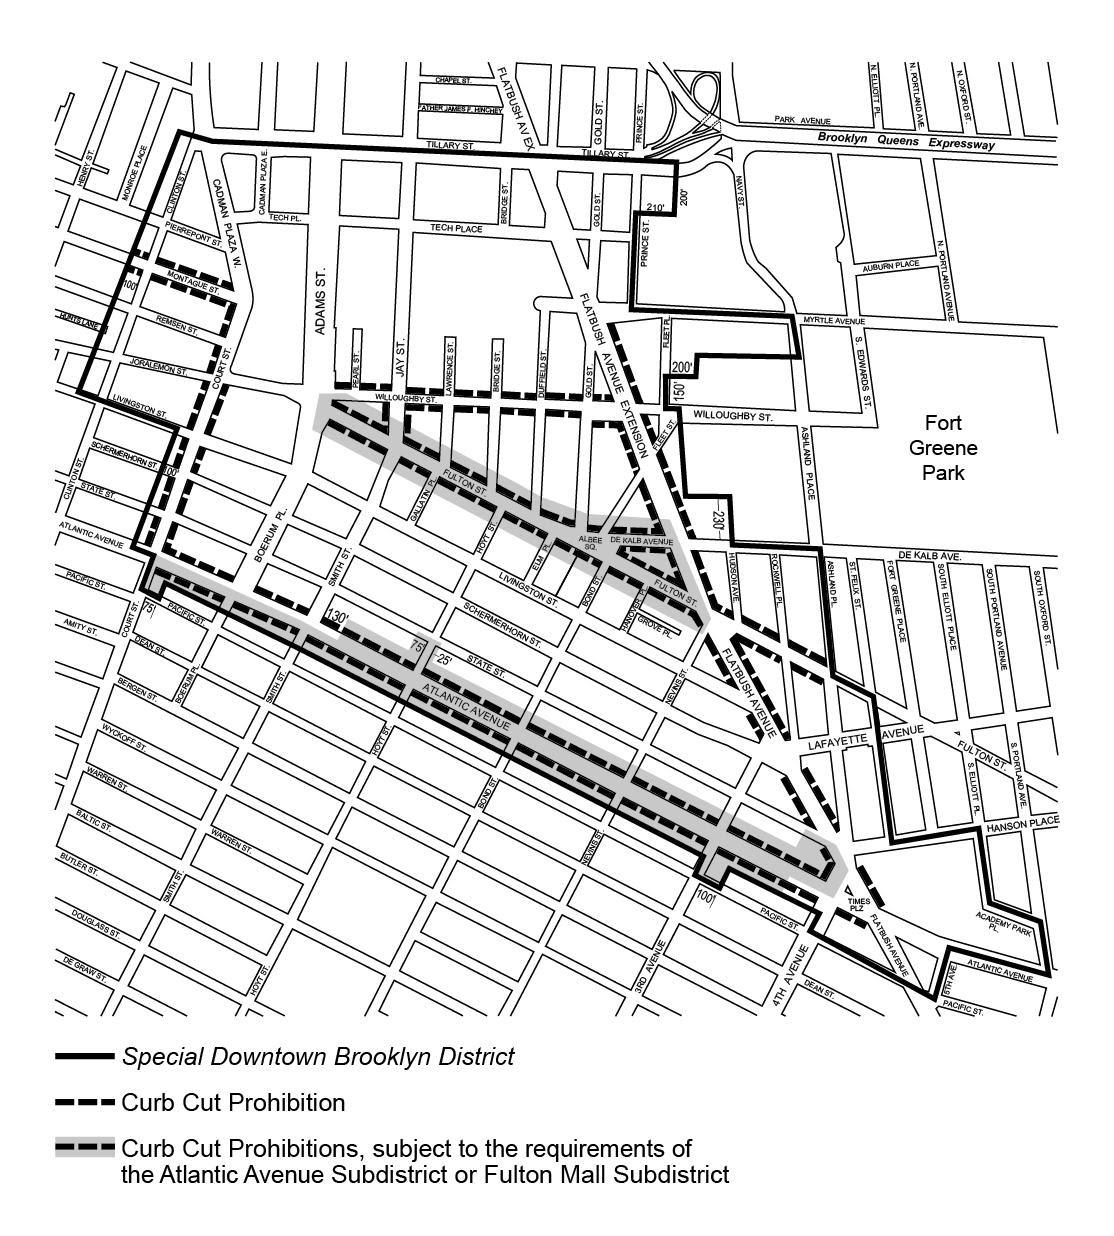 Zoning Resolutions Chapter 1: Special Downtown Brooklyn District Appendix E.4